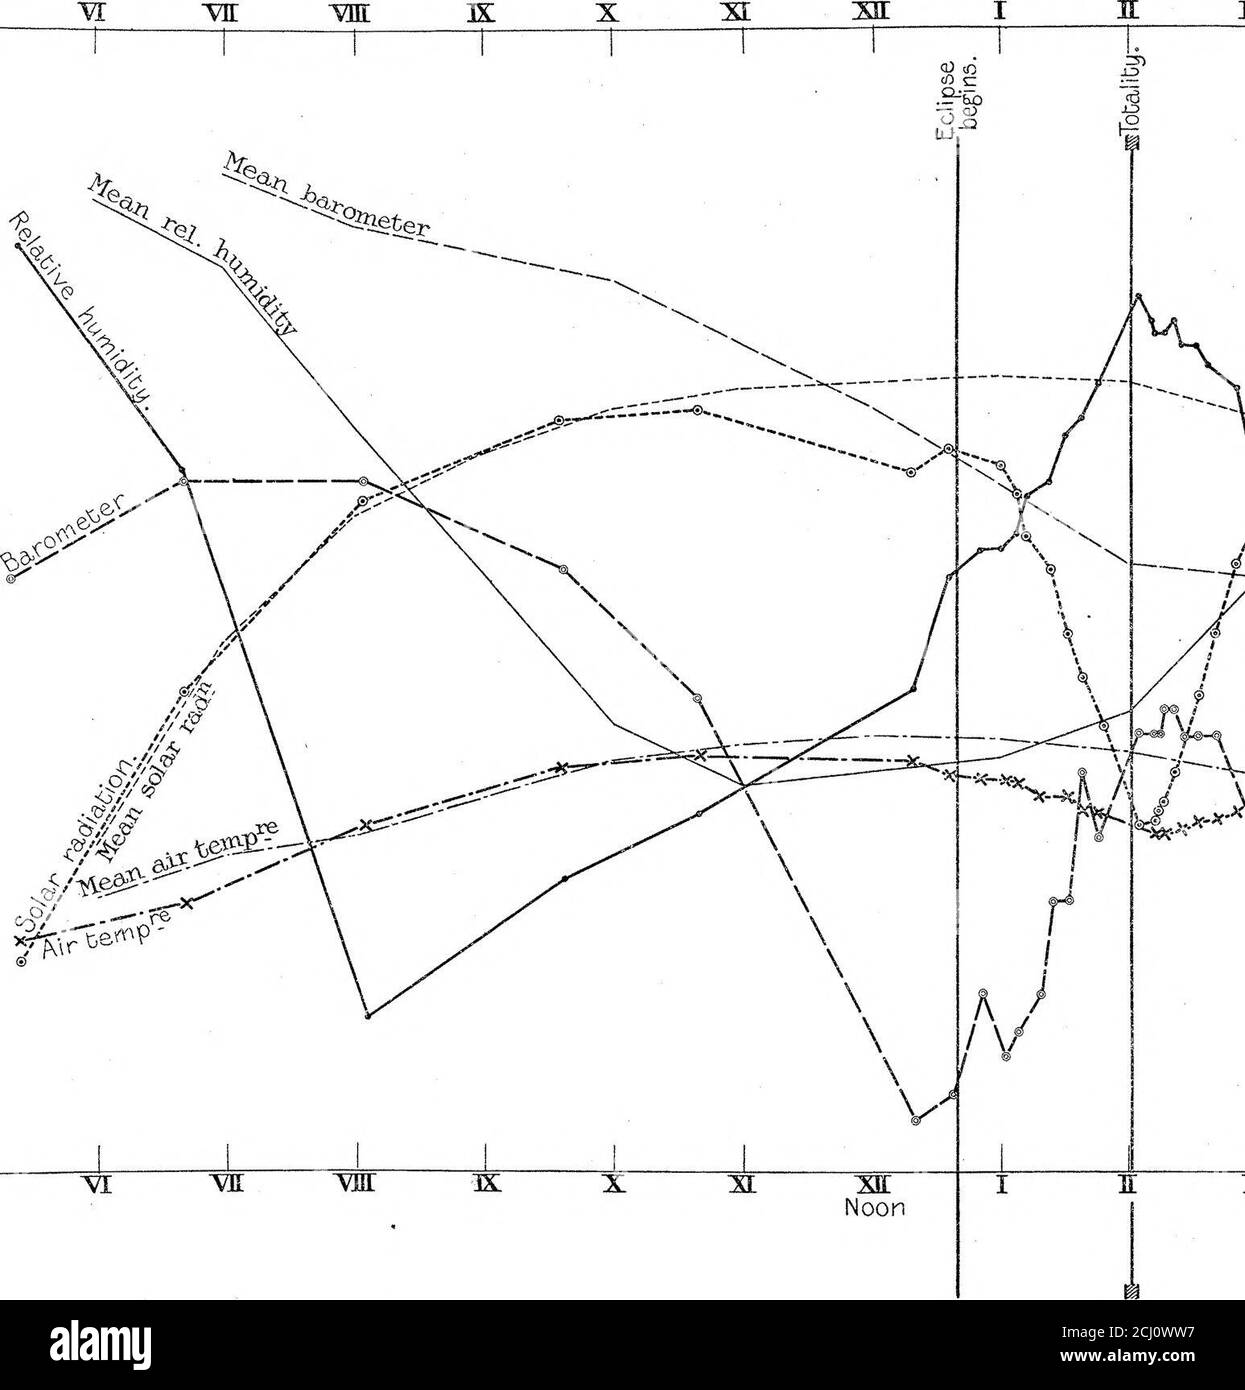 . Report of Private Expedition to Philippeville, Algeria, to View the Total Eclipse of the Sun, August 30, 1905 . s blowing at the time indicated. If the arrows stem is straight, it impliesa steady wind: if wavy, a gusty wind. Where two or more arrows aredrawn diverging from the same point, it signifies that at the correspondingtime the wind was uncertain, blowing from either direction alternately, andchanging through the acute angle between the arrows. A small circle withan arrow head on it means that the wind was shifting all round the compassin the direction towards which the arrow-head poi Stock Photo